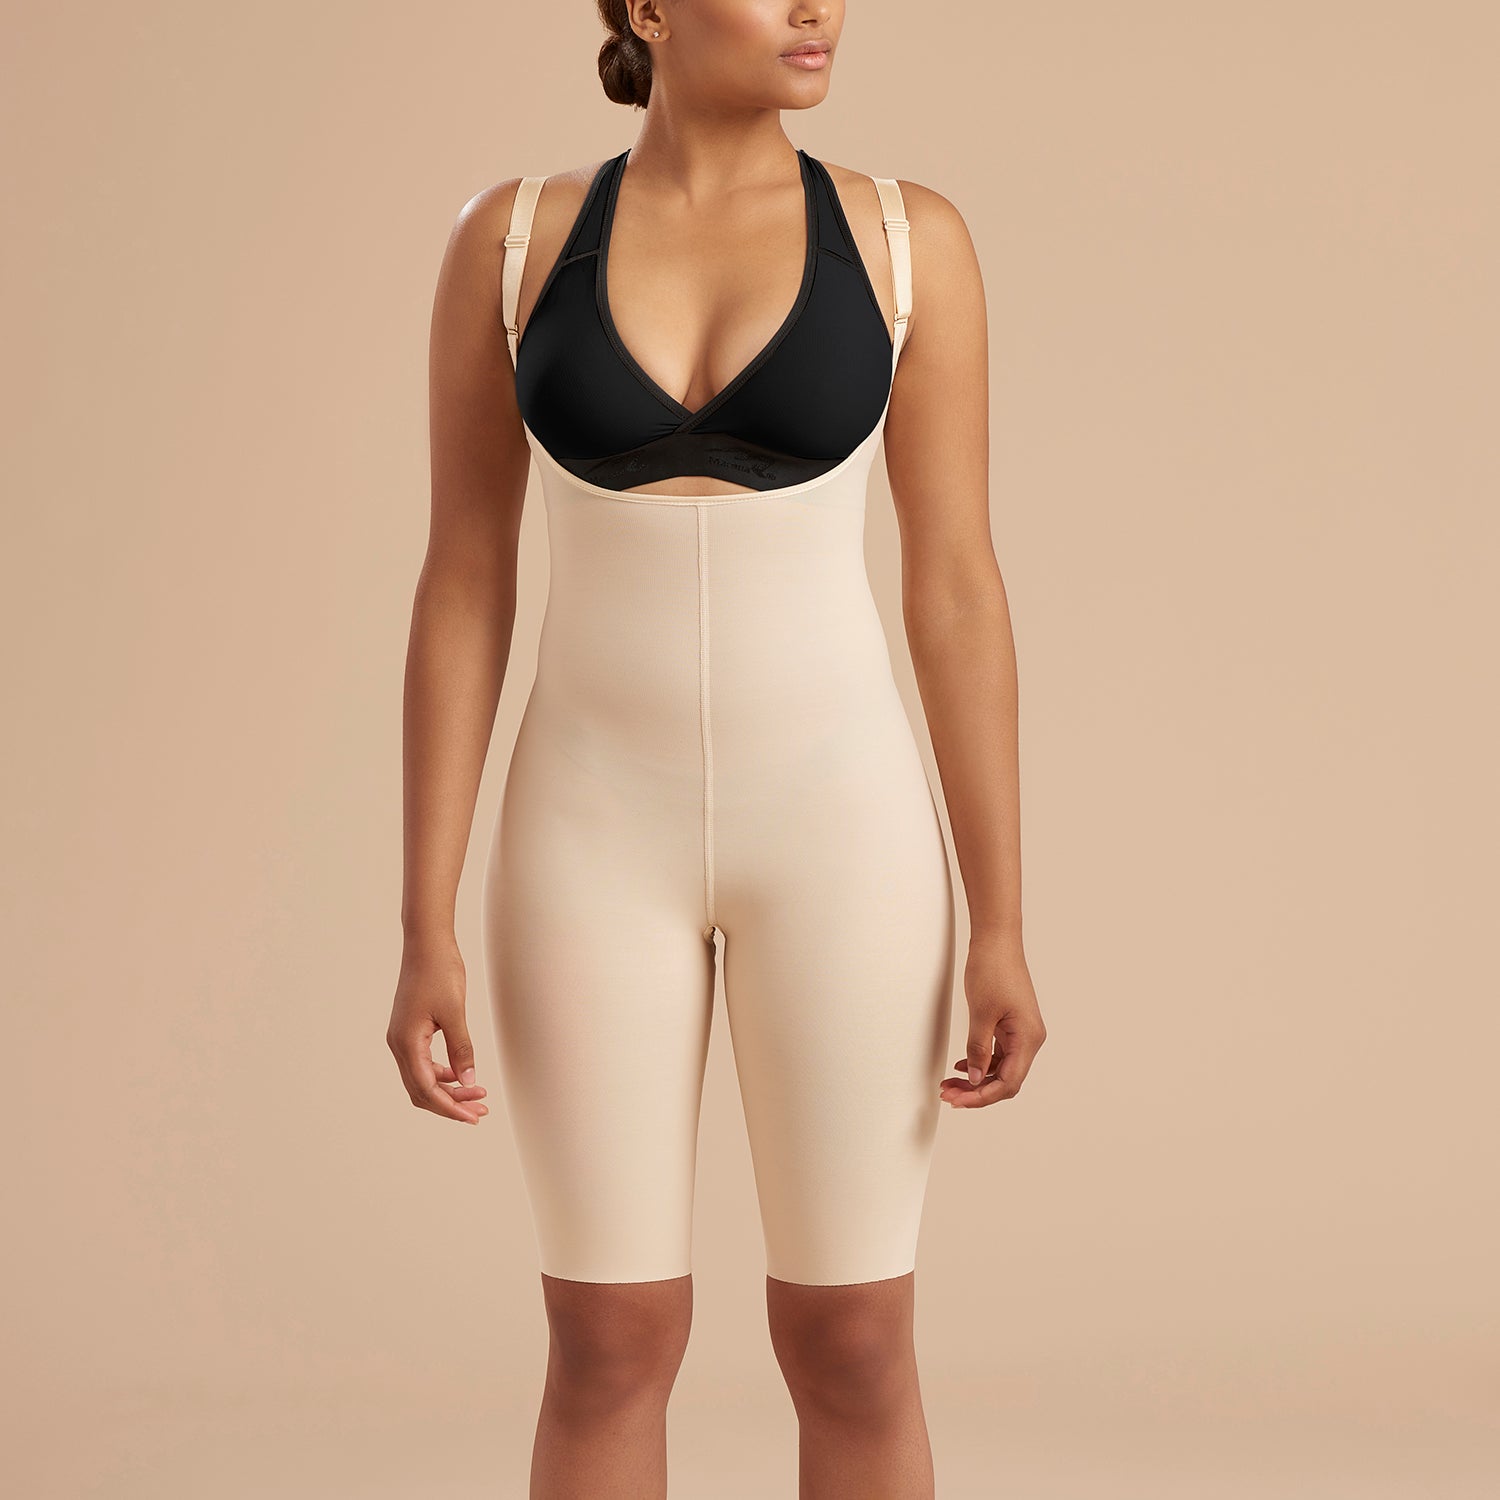 Recovery Compression Garments After BBL Operation - The Marena